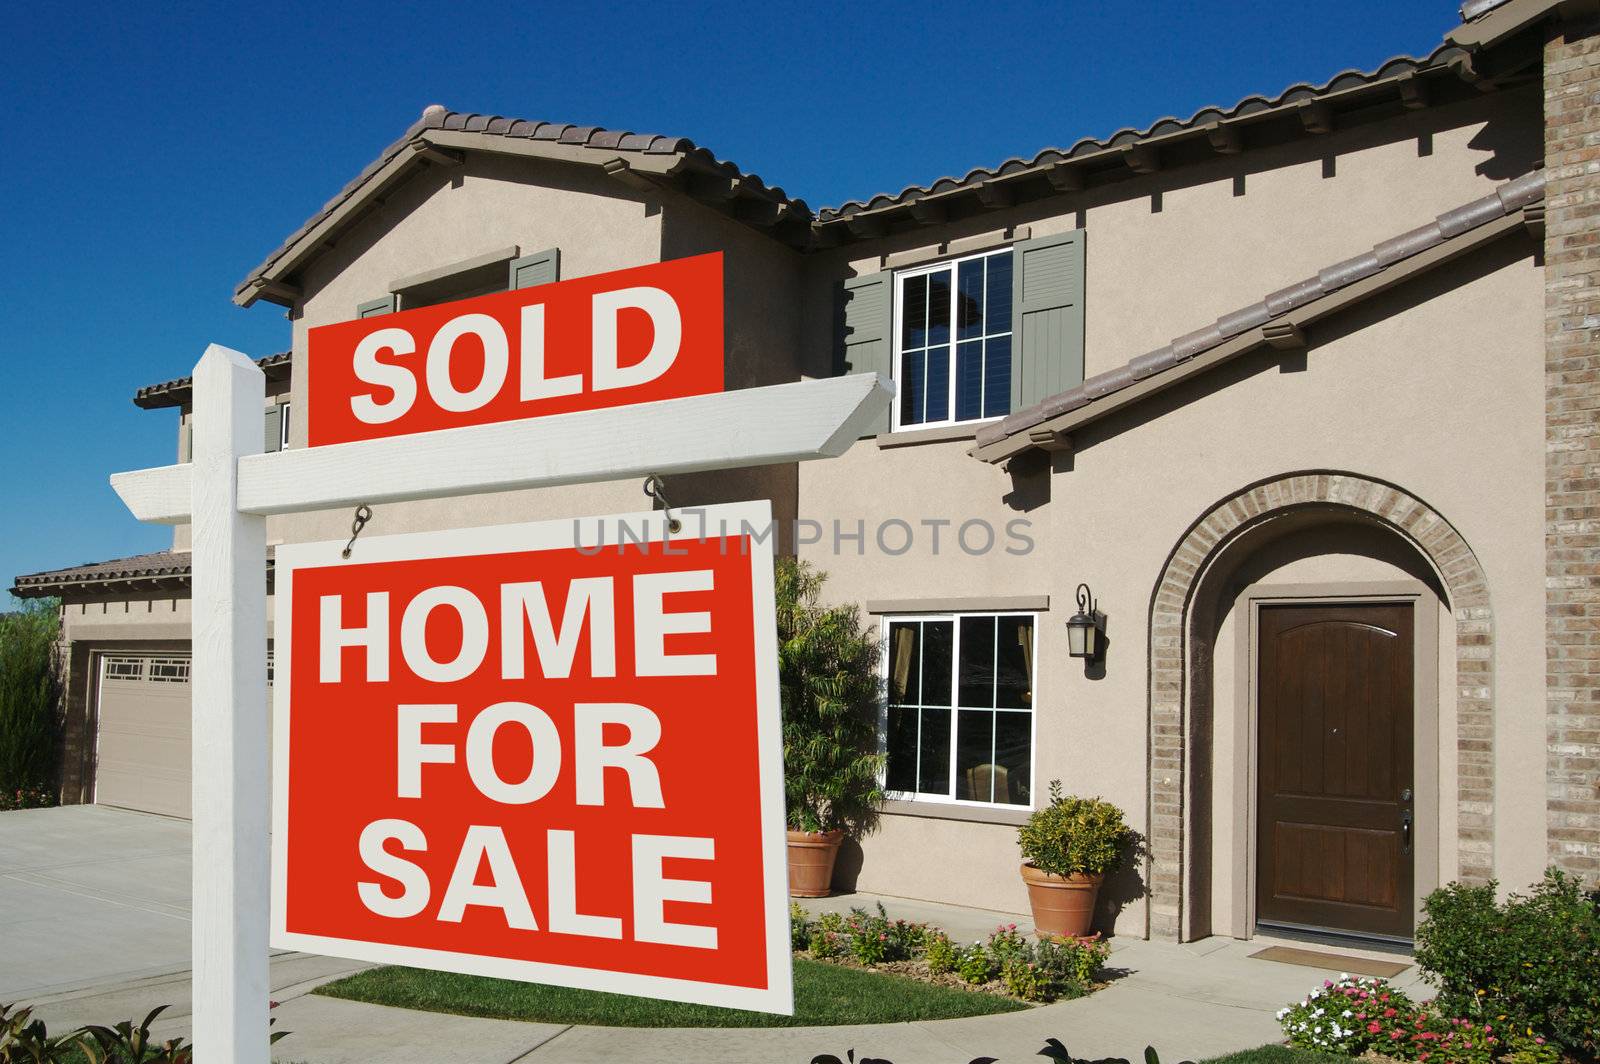 Sold Home For Sale Sign & New House by Feverpitched